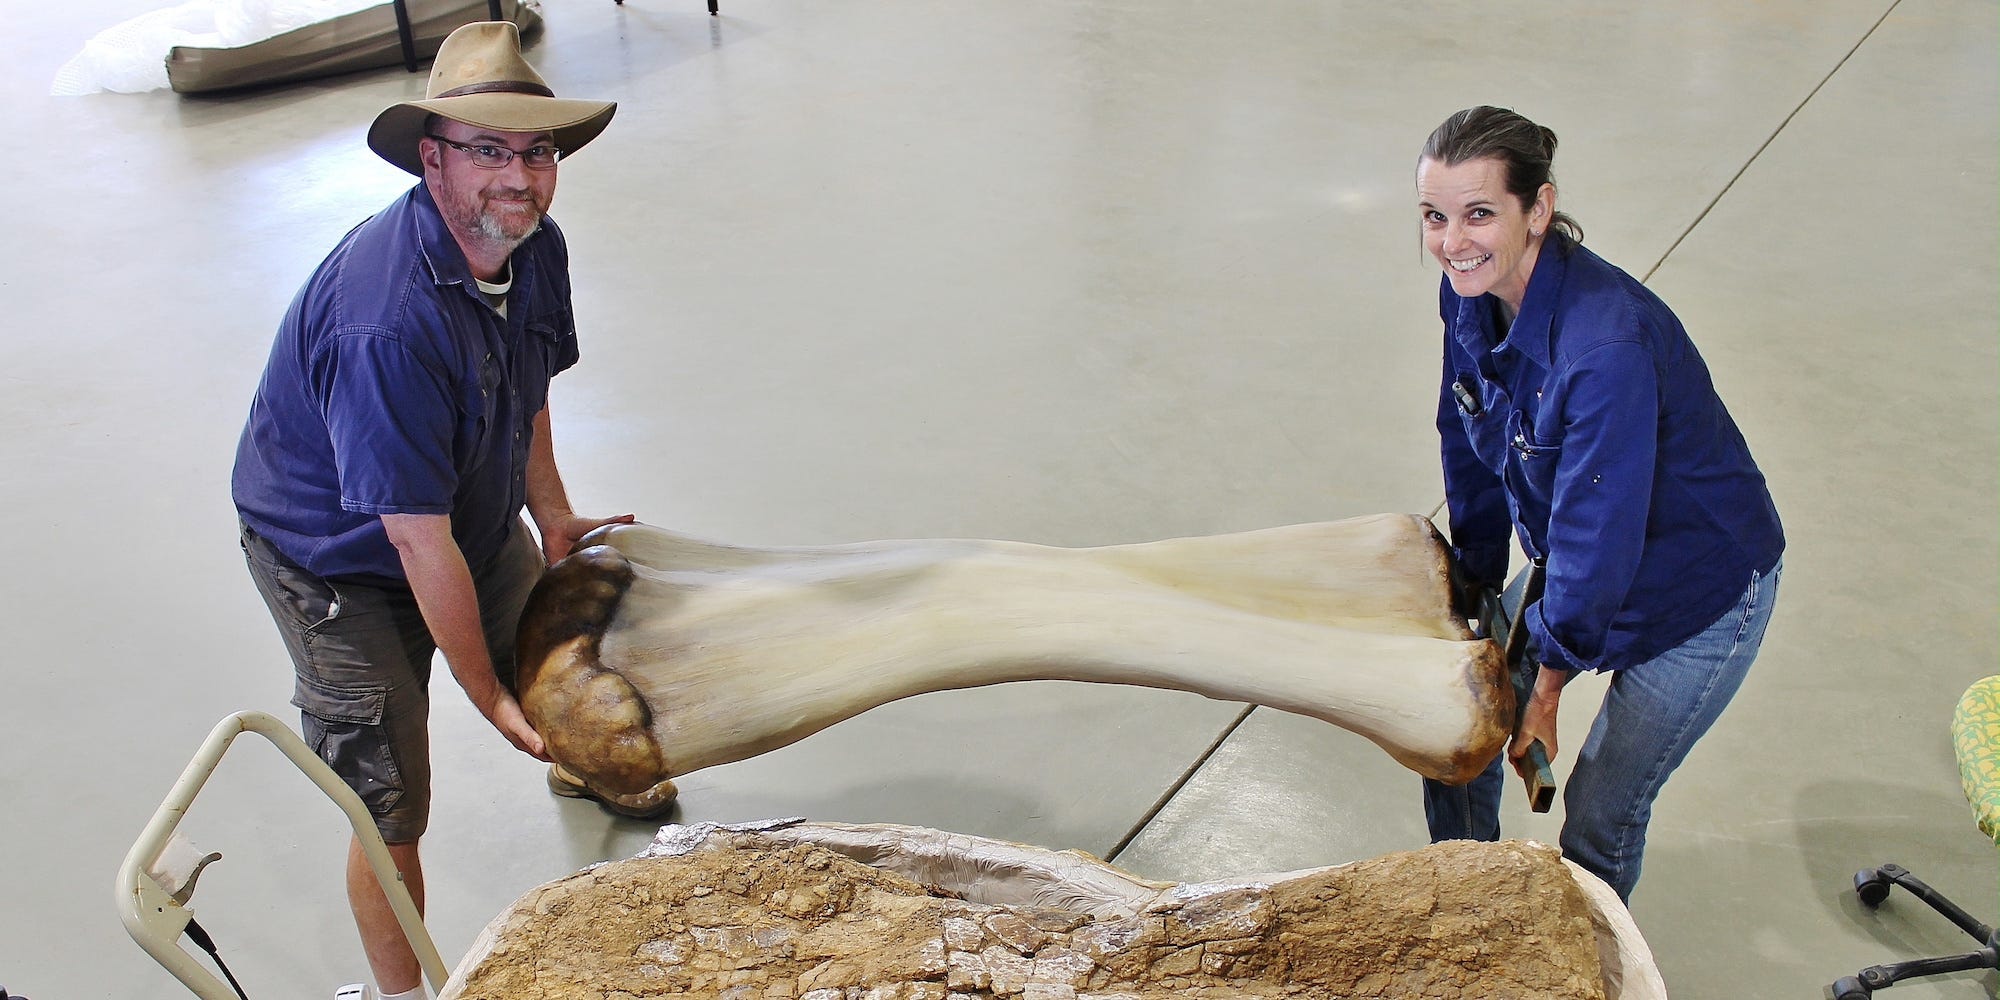 Dr. Scott Hocknull and Robyn Mackenzie pose with a 3D reconstruction and the humerus bone of "Cooper," a new species of dinosaur discovered in Queensland and recognized as the largest ever found in Australia.